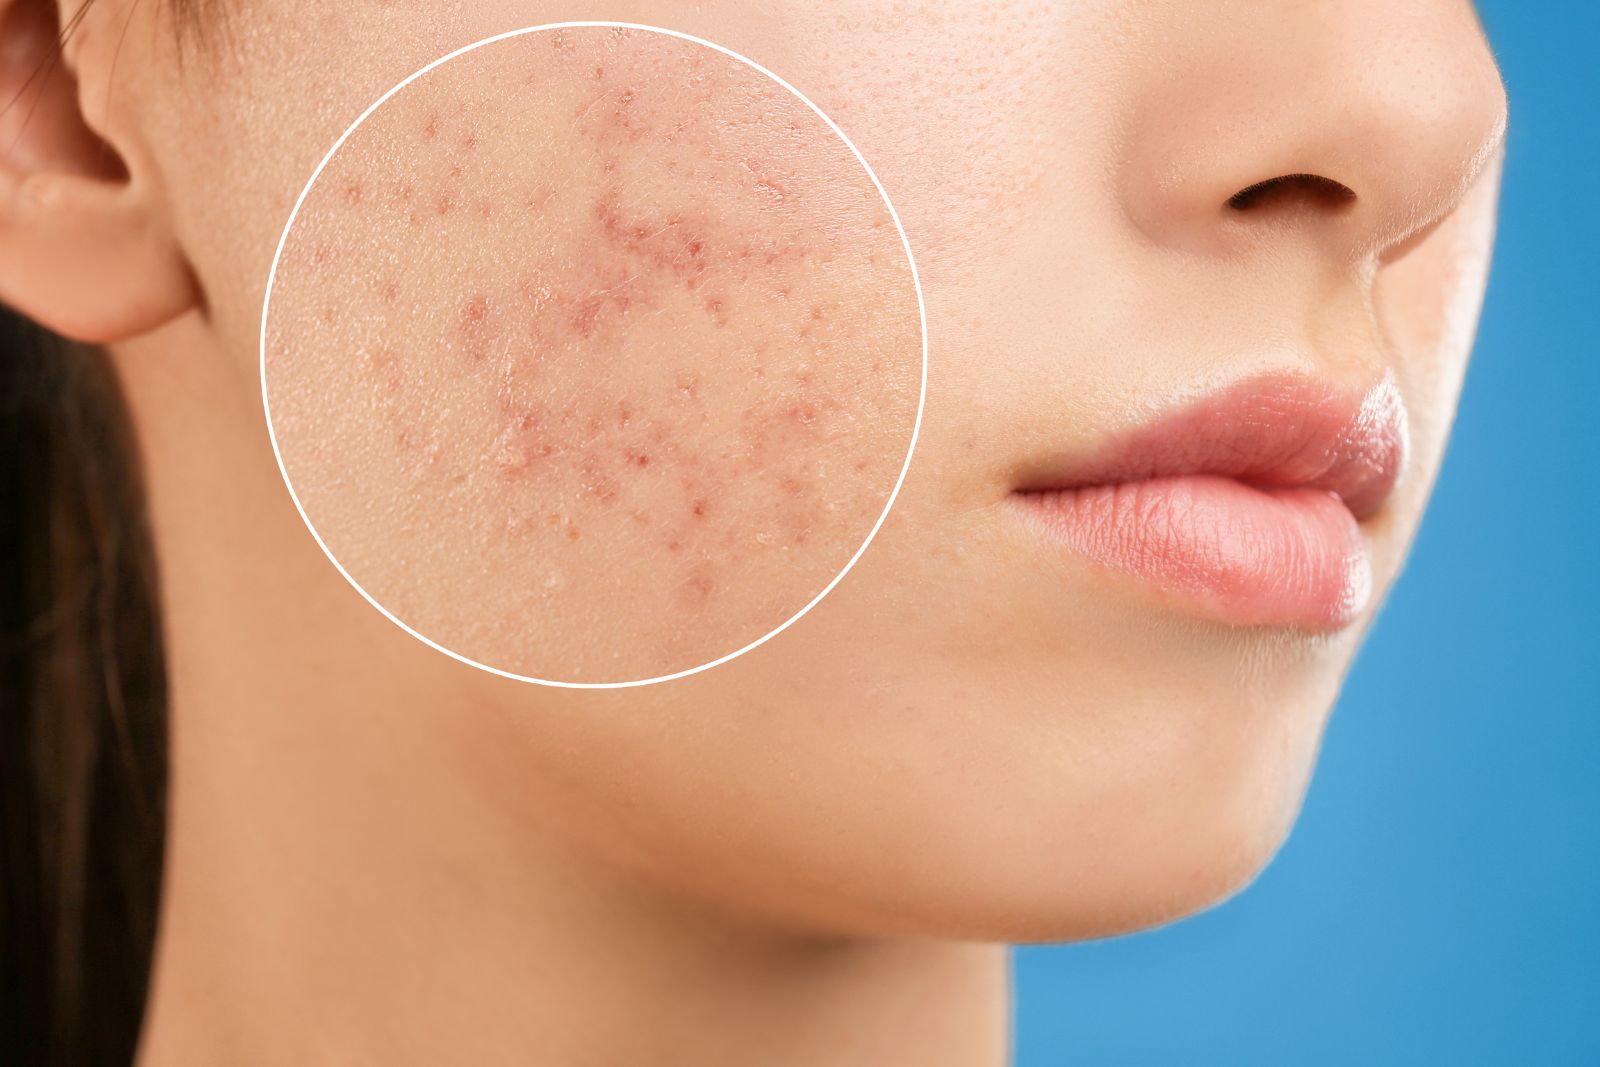 Close-up of a woman's face focusing on acne problems, with a magnified circle highlighting the affected skin.